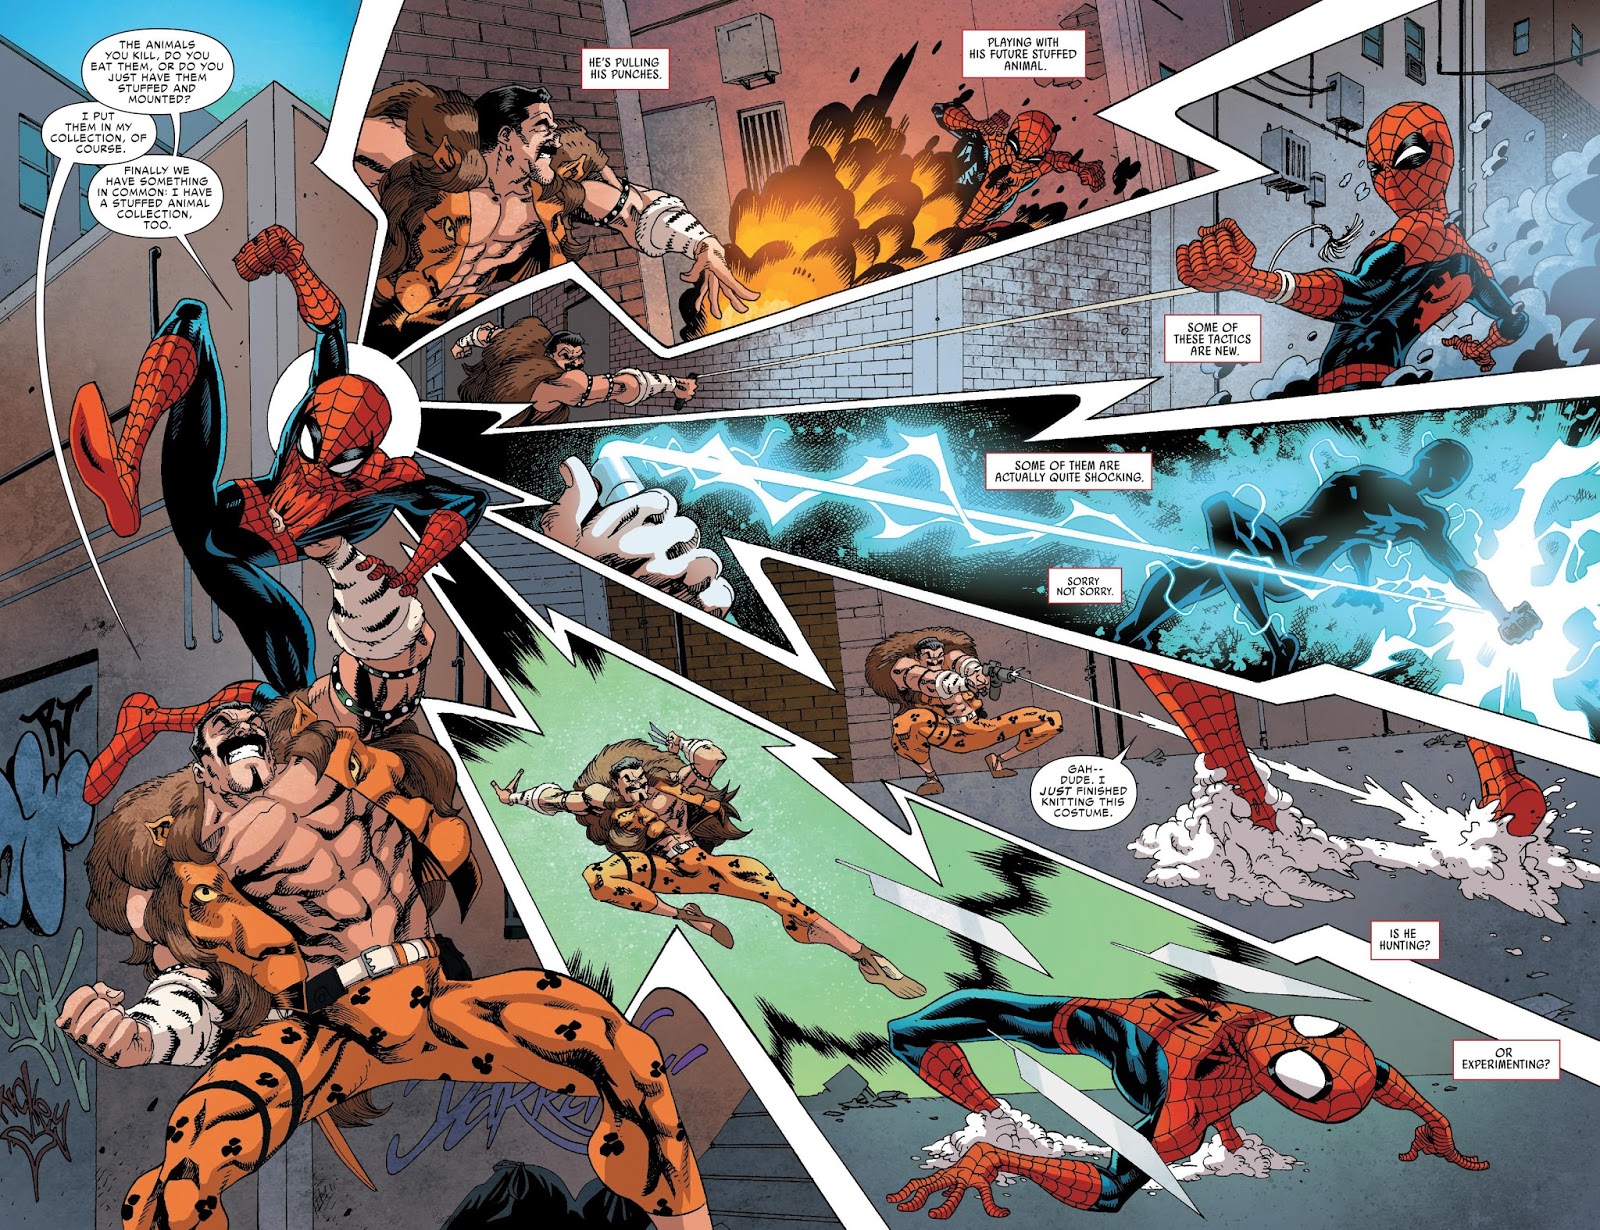 Turns out Kraven was sent by Doctor Octopus to fight Spider-man to see what...